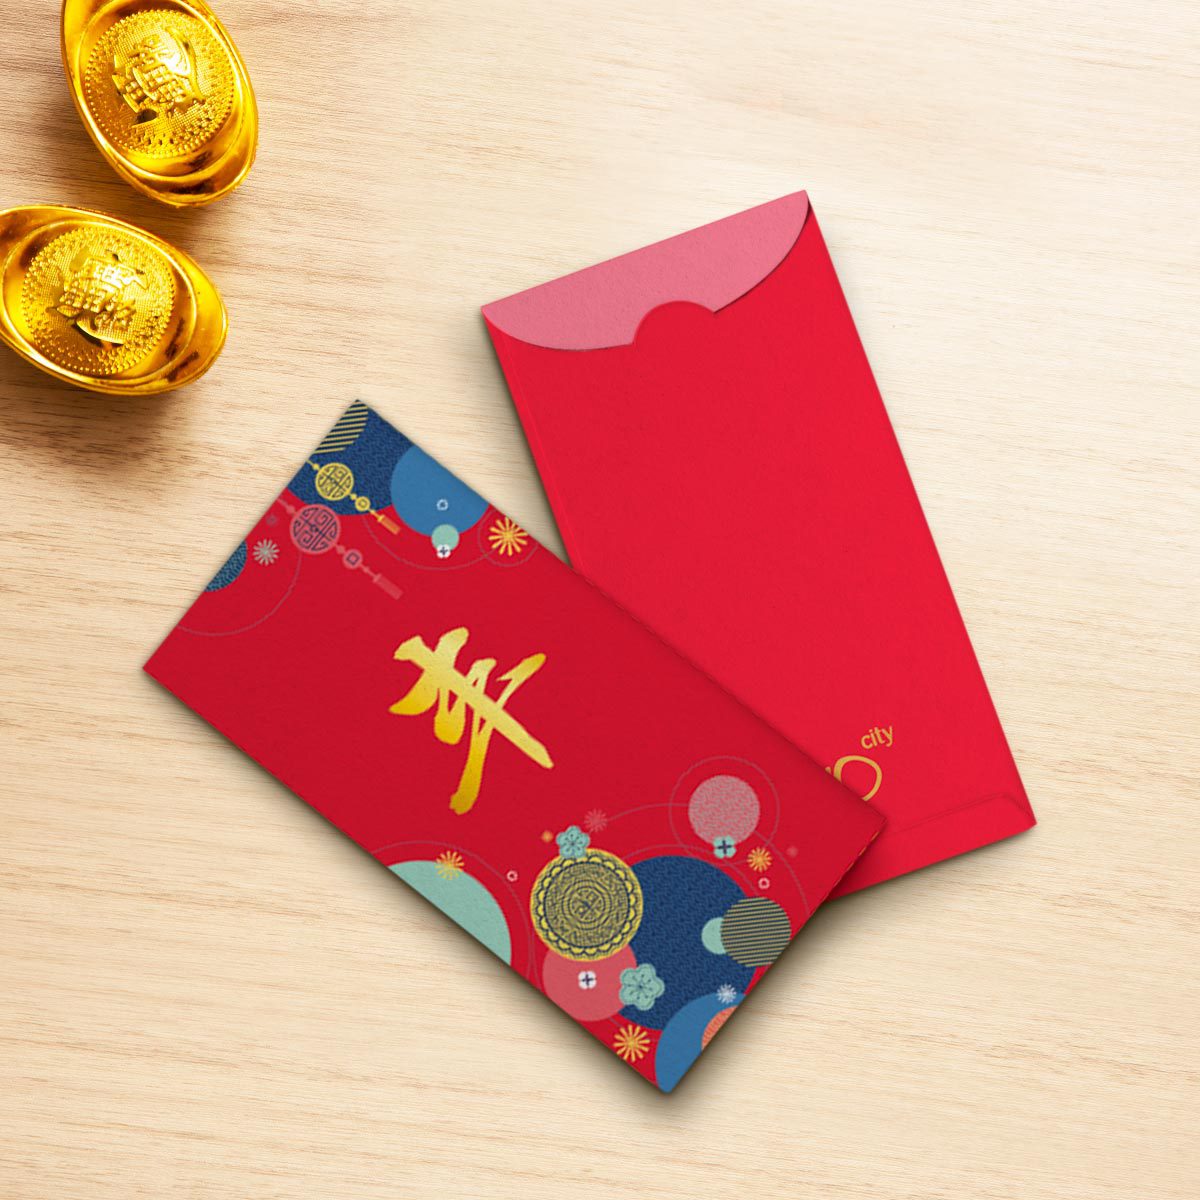 Effective Marketing: Branded Red Packets for Event Gifts